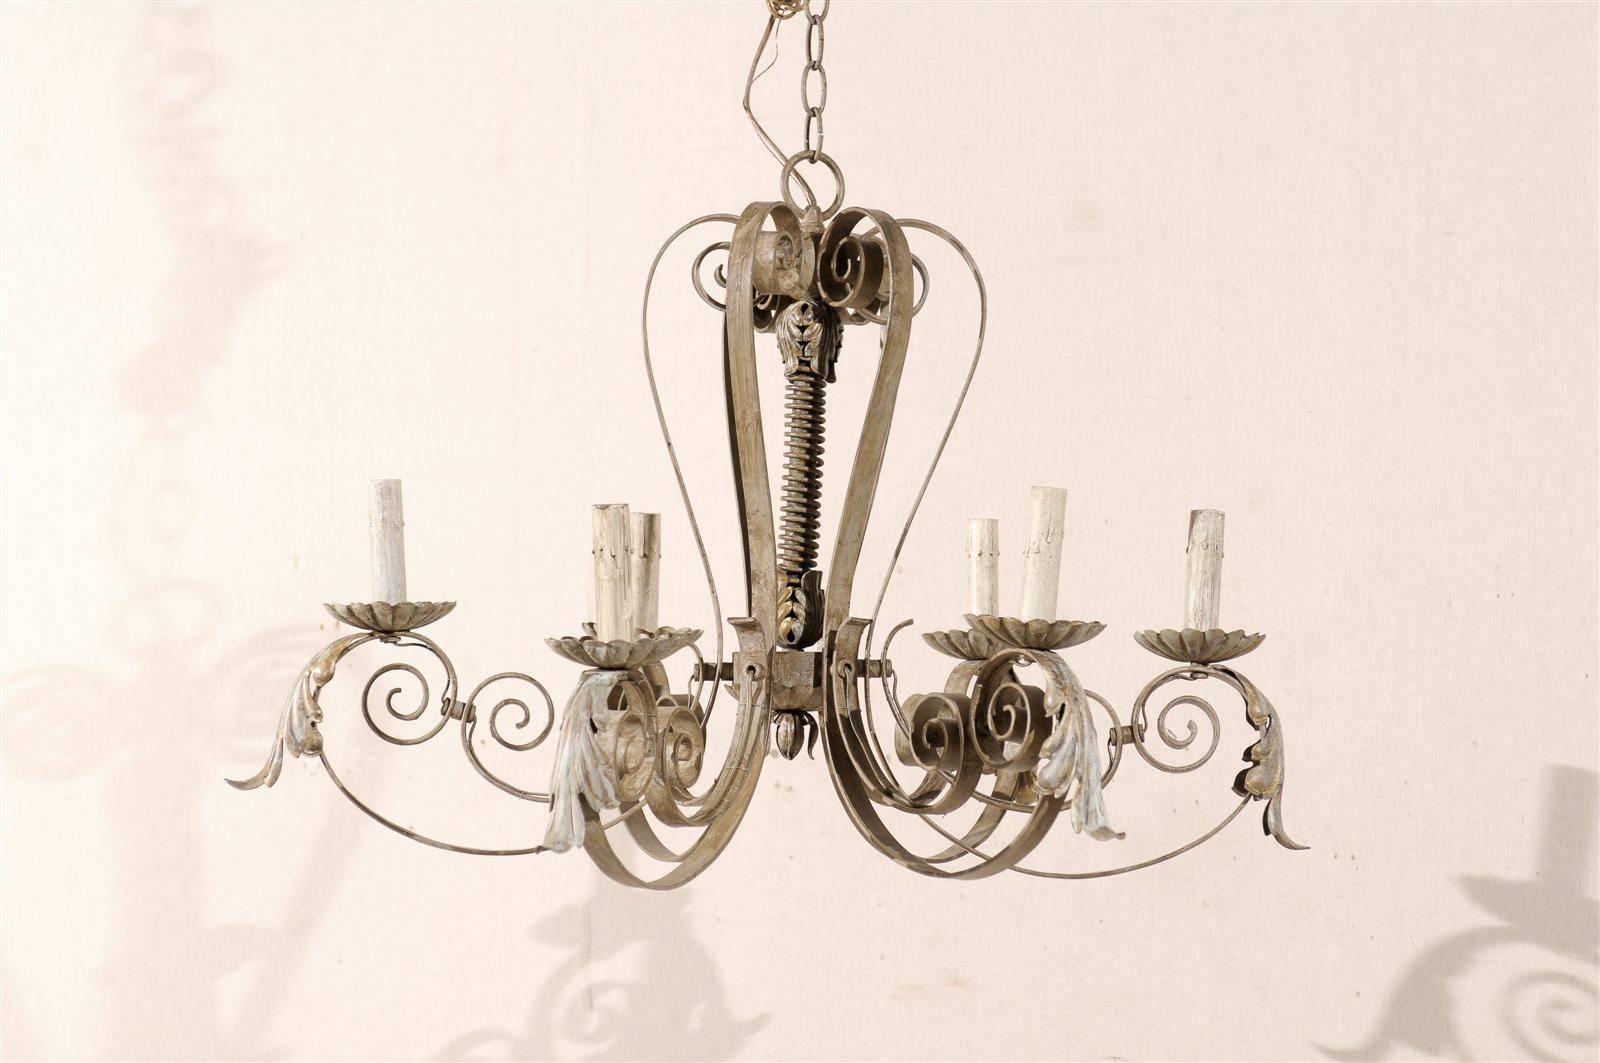 A French six-light painted metal chandelier with acanthus leaf motifs and scrolled arms. This chandelier has six scrolled arms. Above each arm is an additional decorative scroll motif. This chandelier is a soft warm grey color. Mid-20th century.